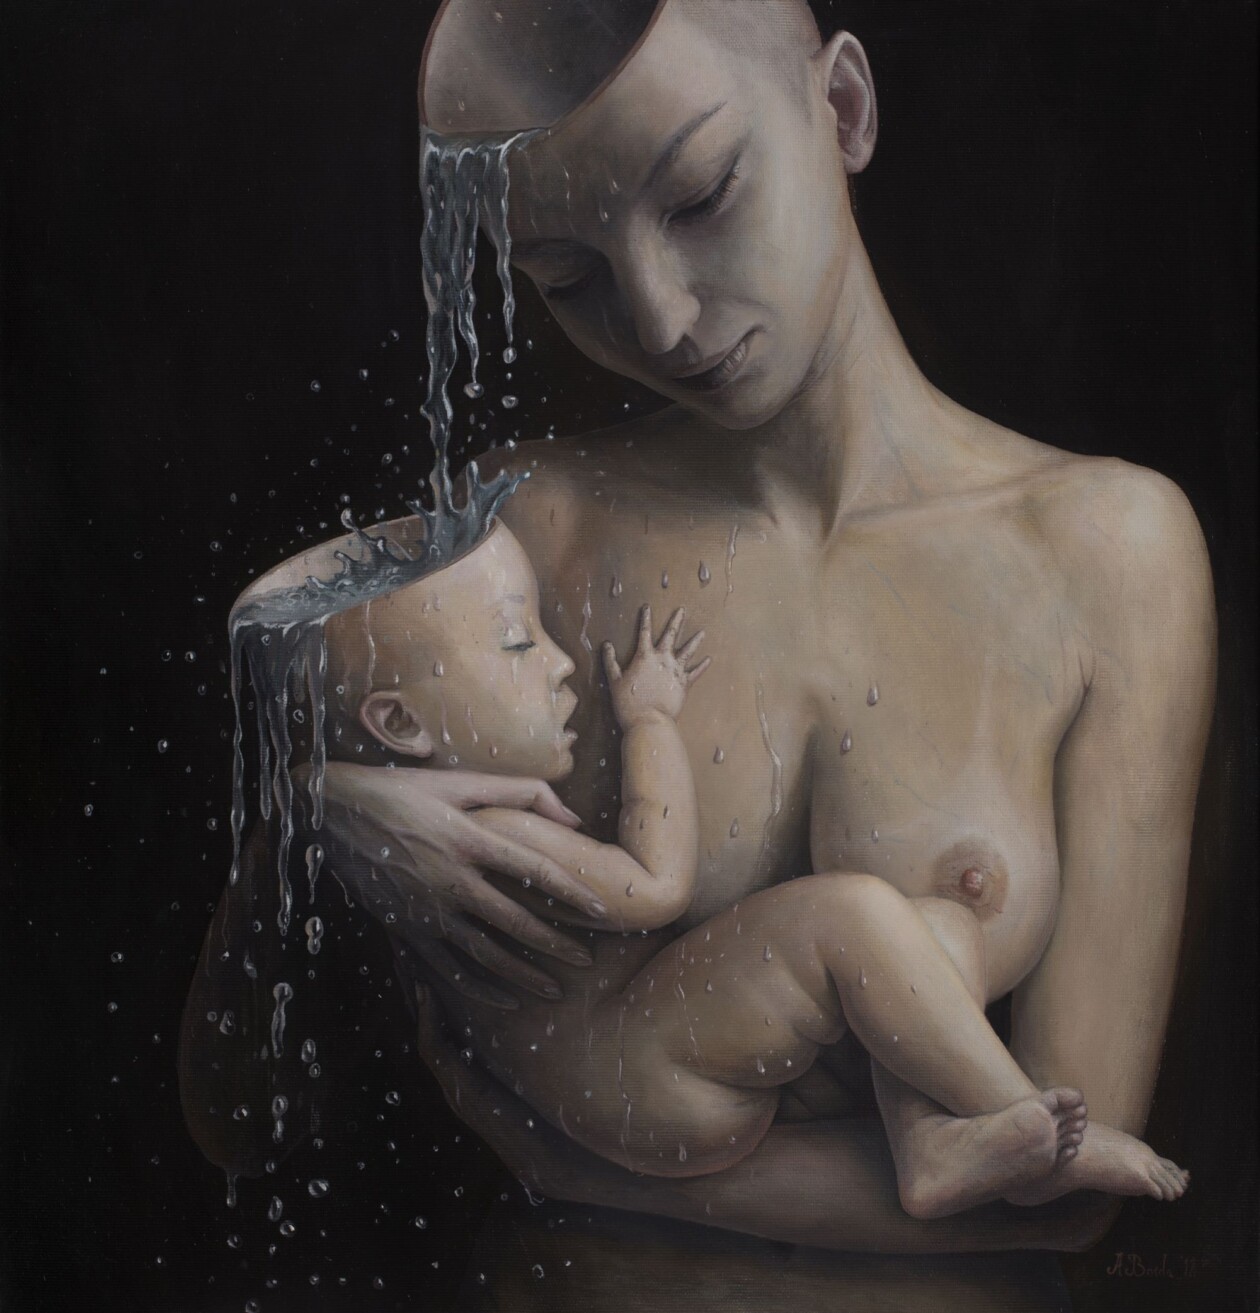 Mesmerizing And Thought Provoking Surreal Paintings By Adrian Borda (8)